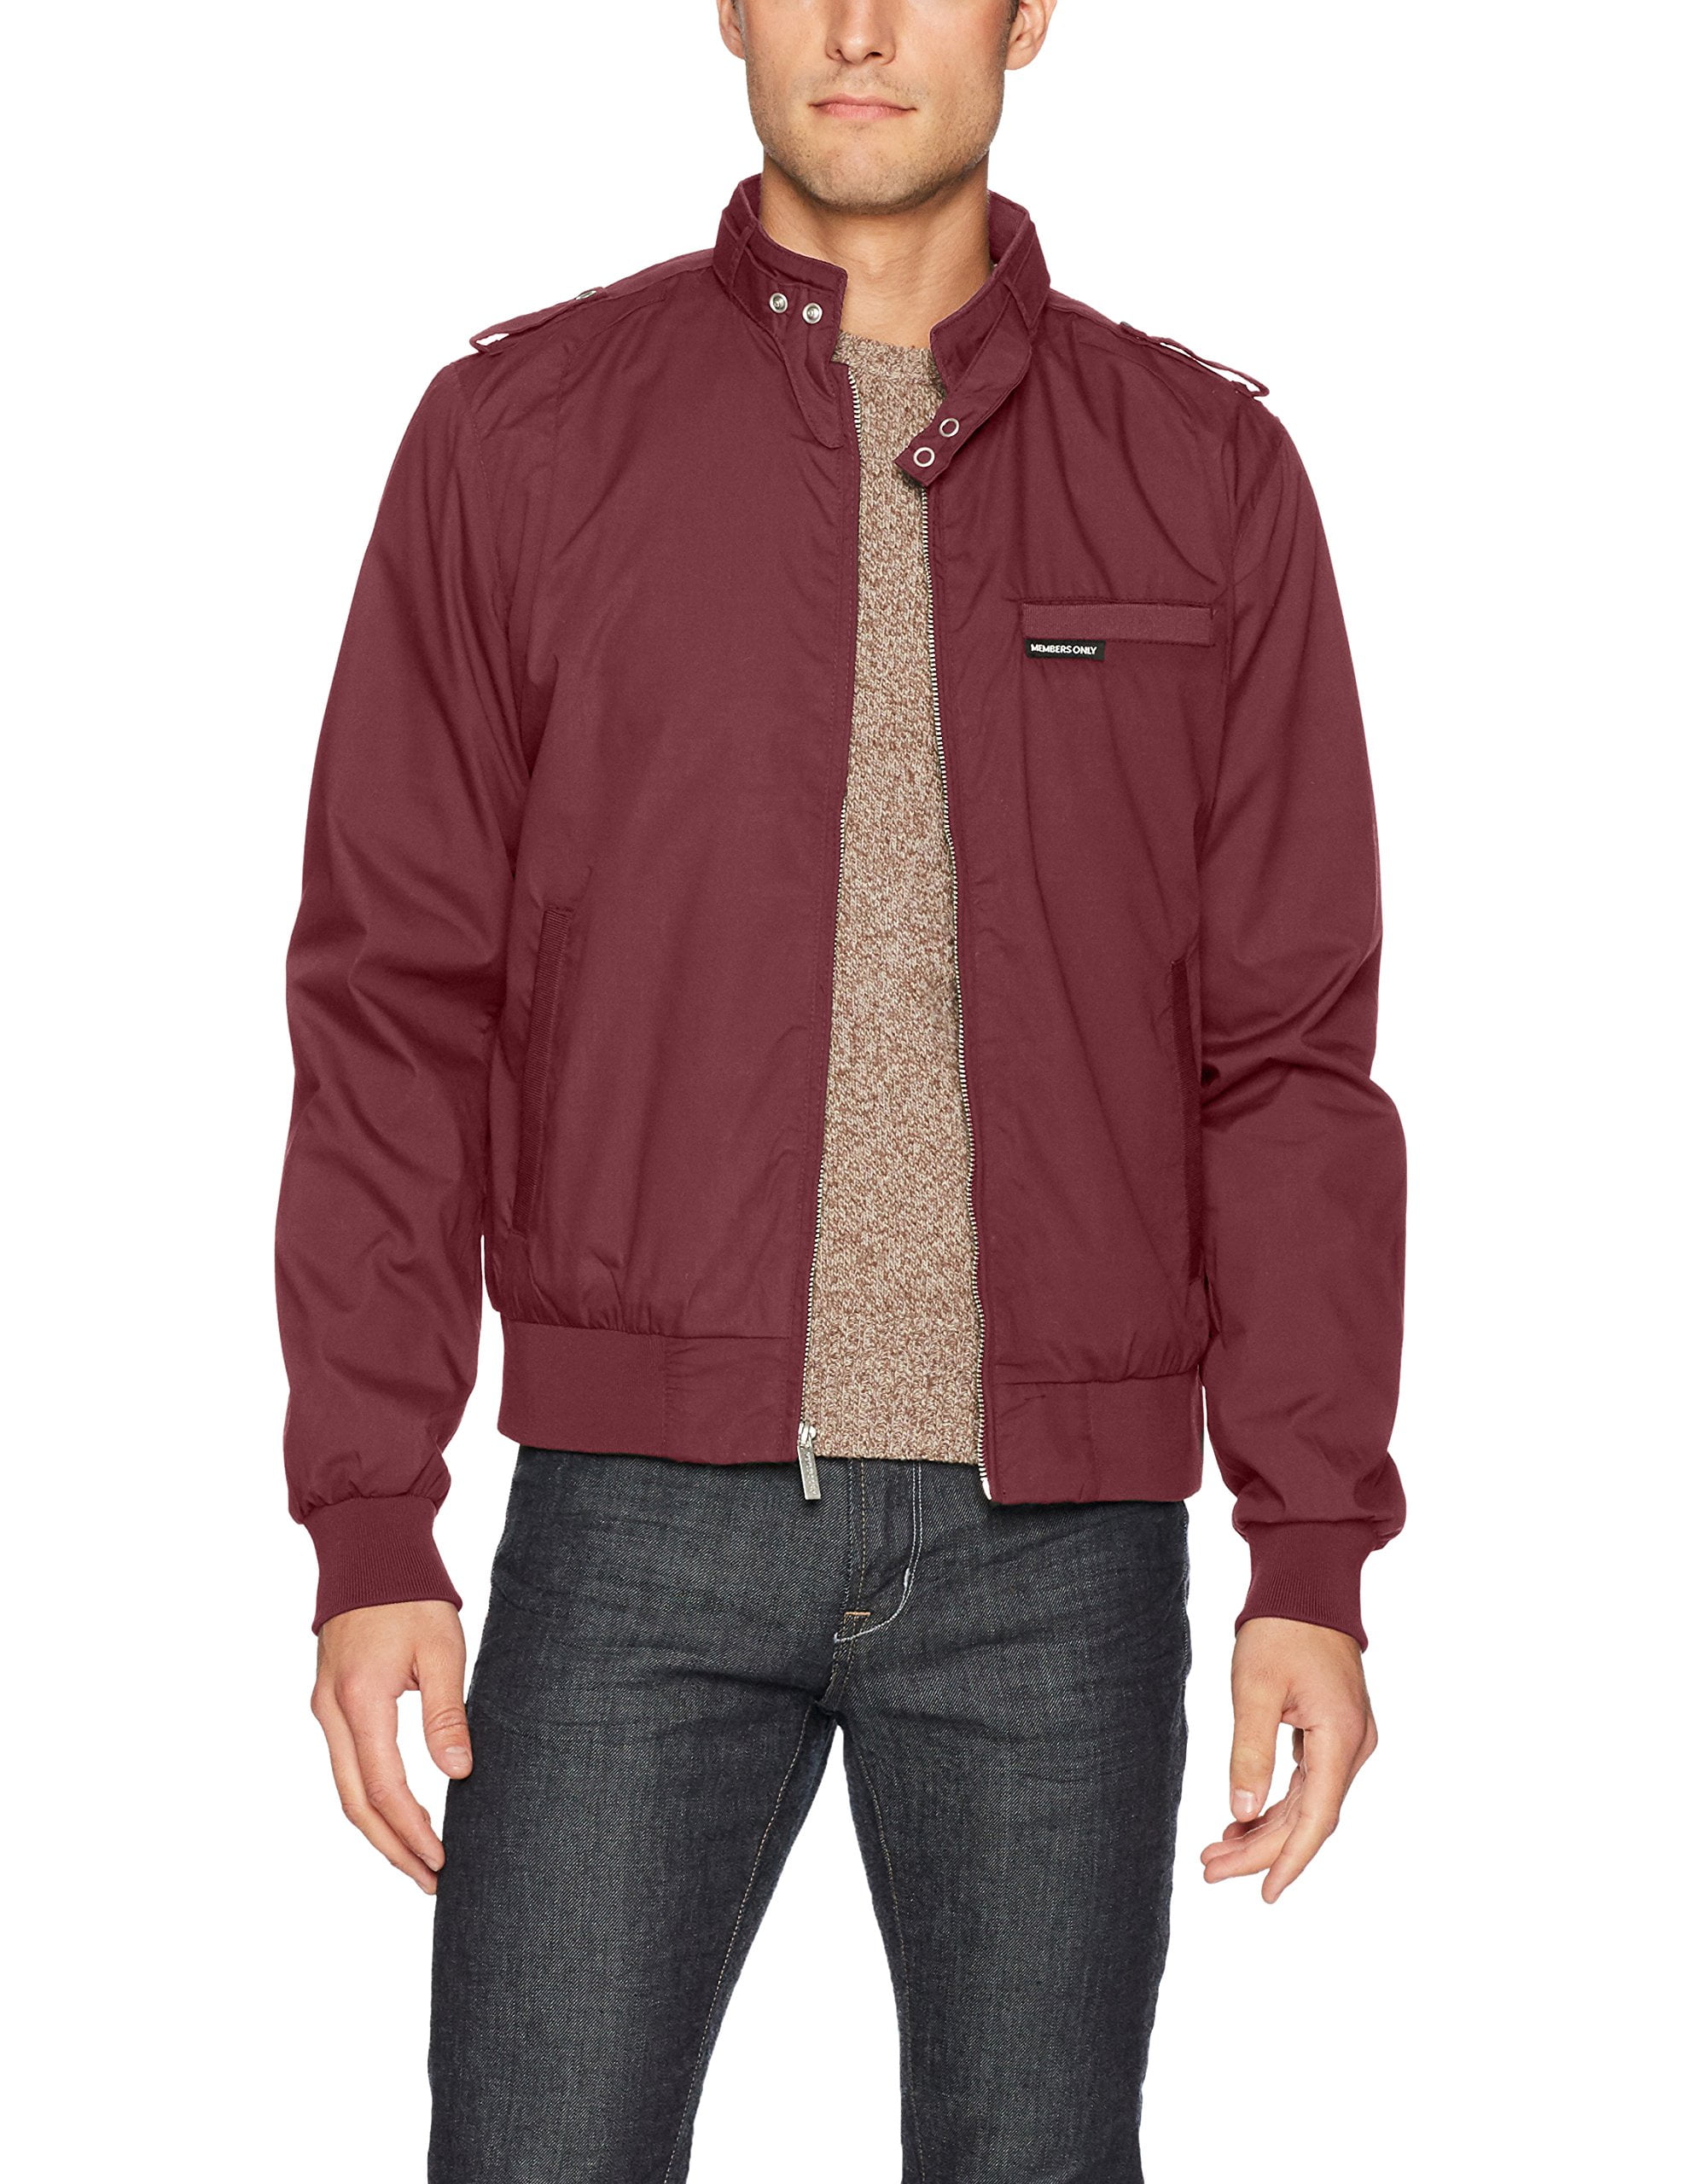 Members Only - Members Only Men's Classic Iconic Racer Jacket SlimFit ...